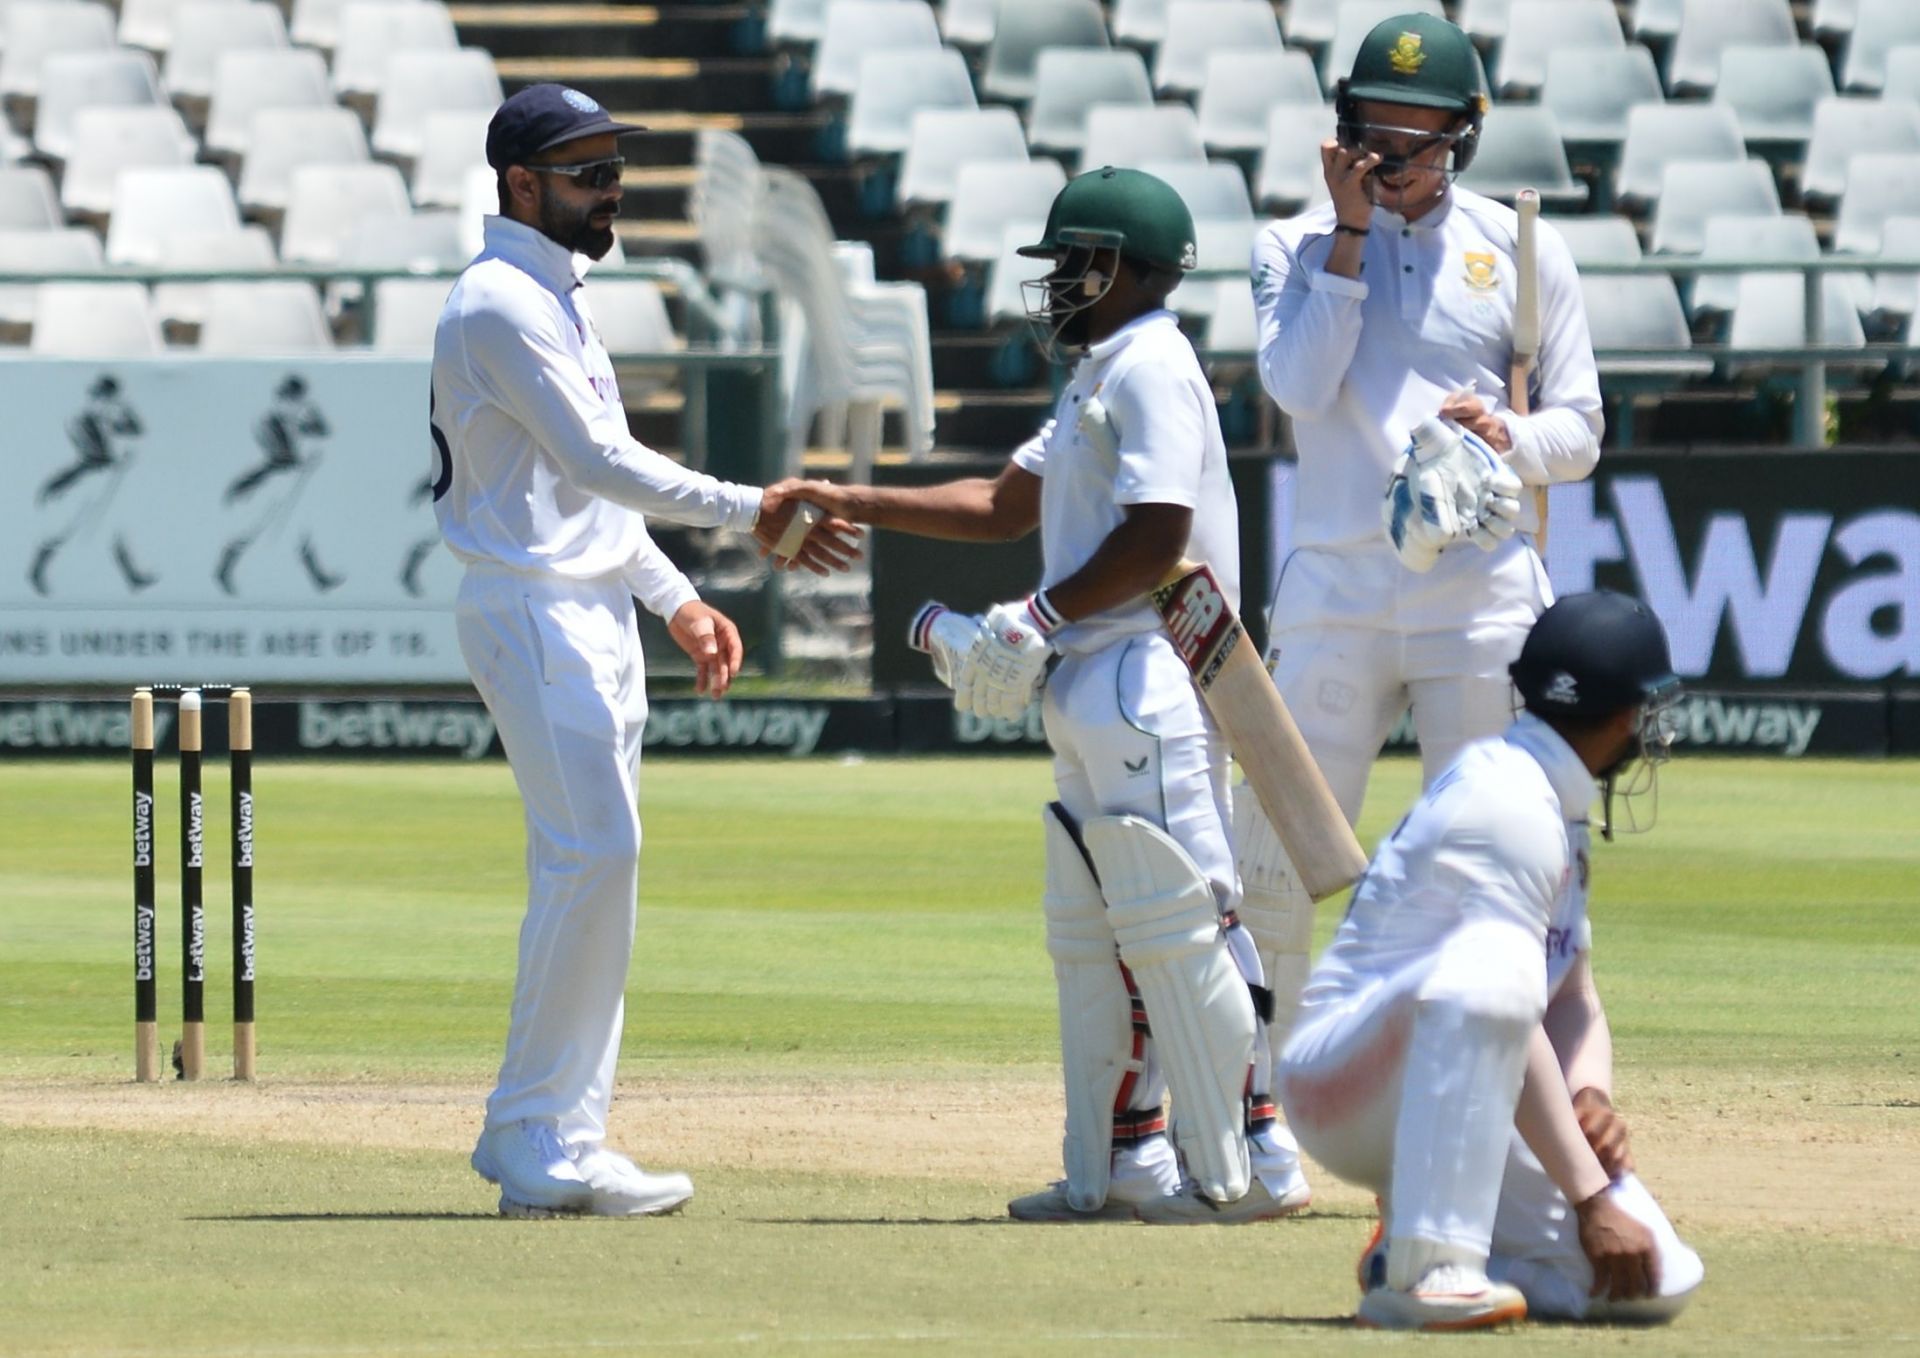 South Africa registered a come-from-behind series win against India.